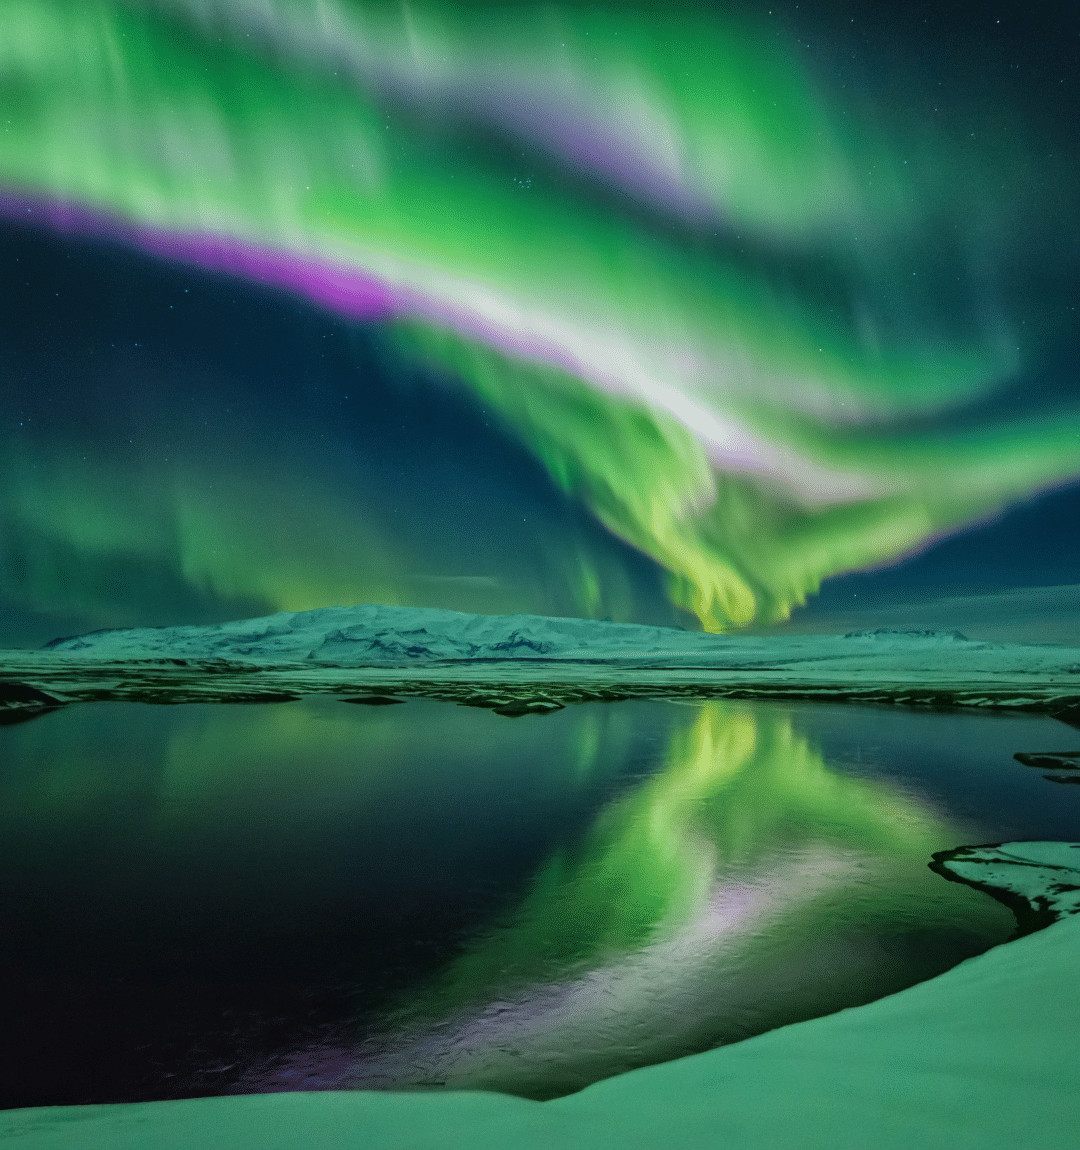 When Can You See the Northern Lights in Iceland? - 2